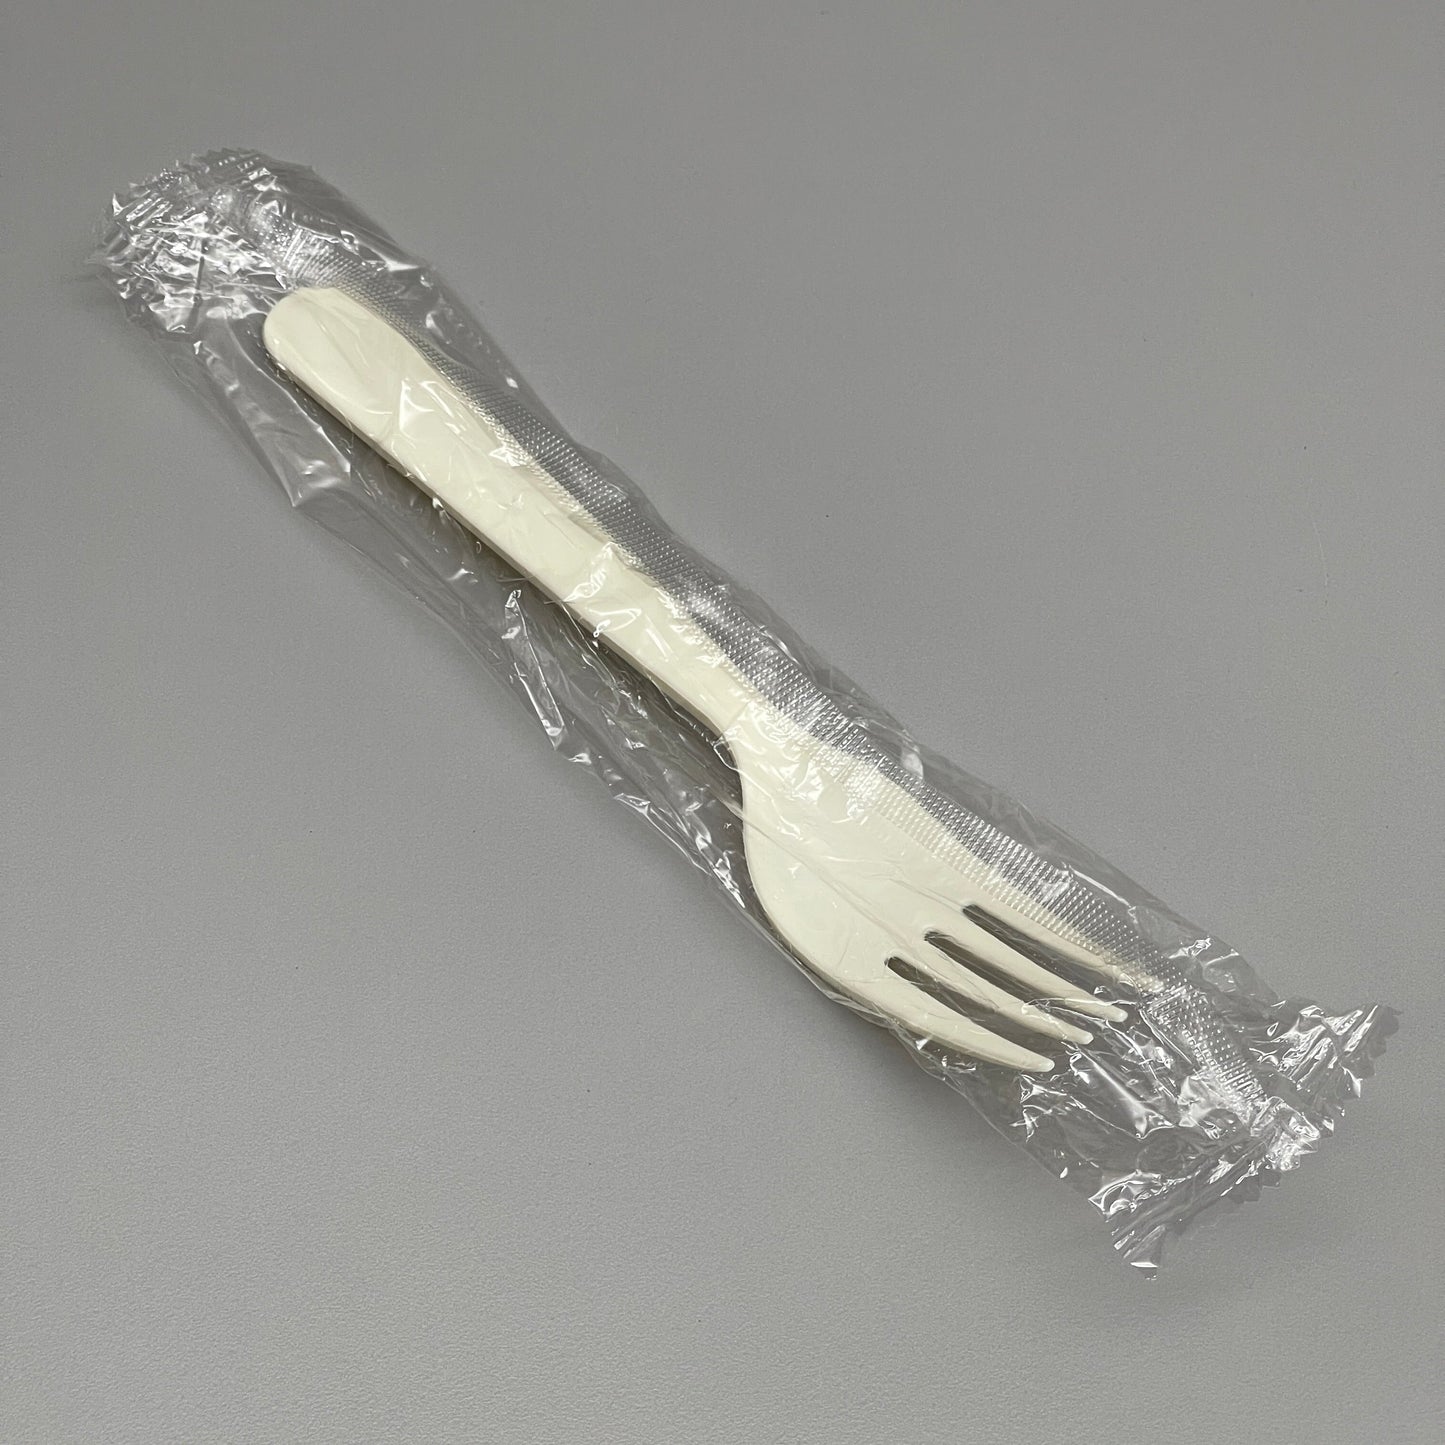 ZA@ KANAK NATURALS Heavy Weight Flexible Plastic Forks Individually Wrapped 1000 ct Cream PC6200 (New) F